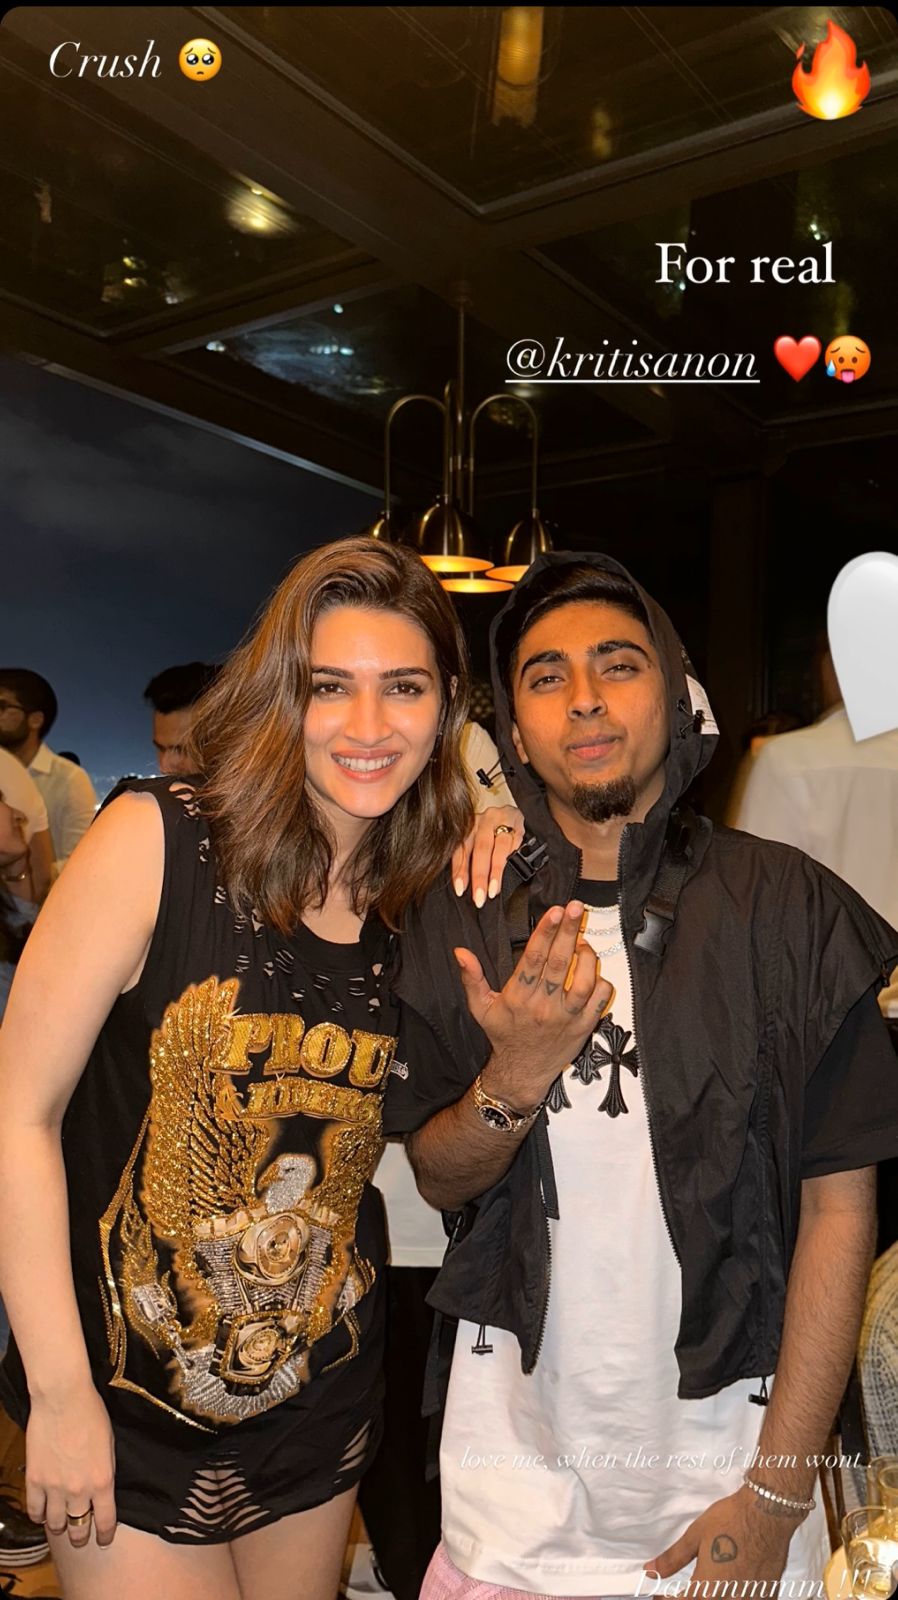 MC Stan's Unforgettable Moment Meeting Crush Kriti Sanon at Diljit Dosanjh Concert; Check Pictures